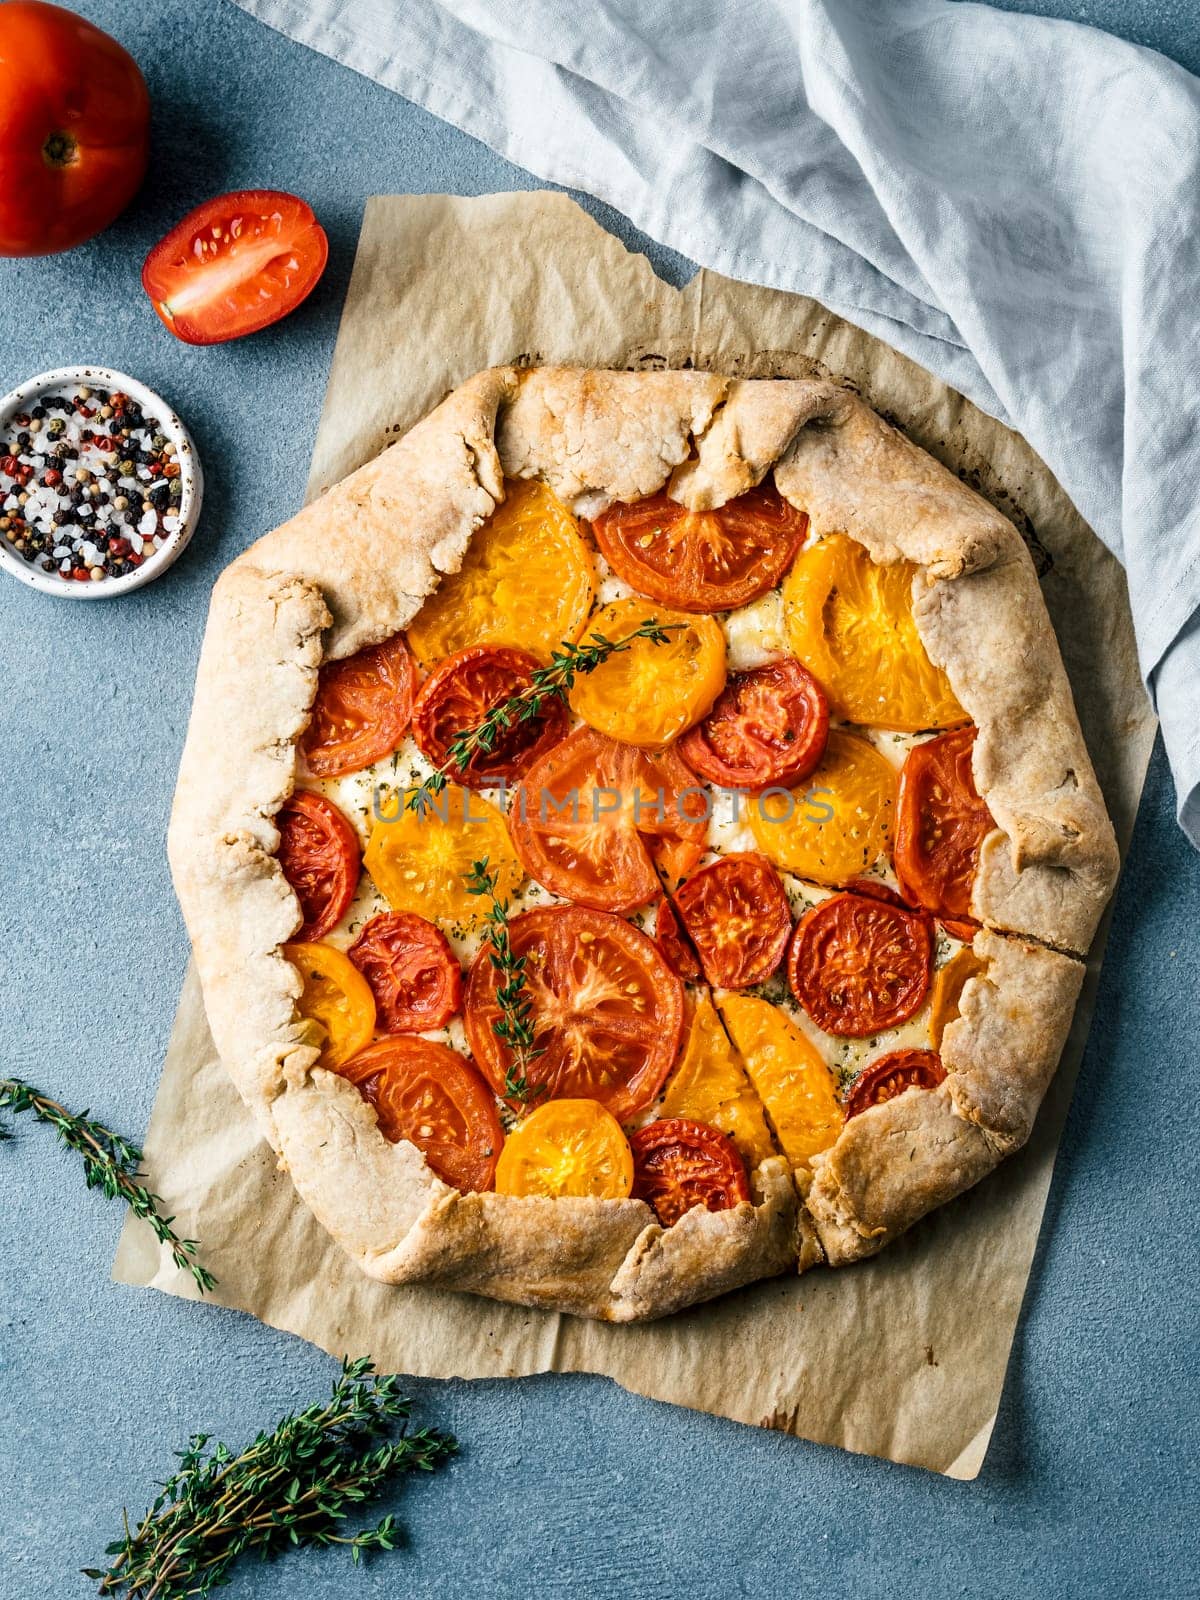 Savory fresh homemade tomato tart or galette.Ideas and recipes for healthy lunch,appetiezer- whole wheat or rye-wheat pie with tomatoes,parmesan cheese,mozzarella.Harvest tomatoes.Flat lay.Vertical